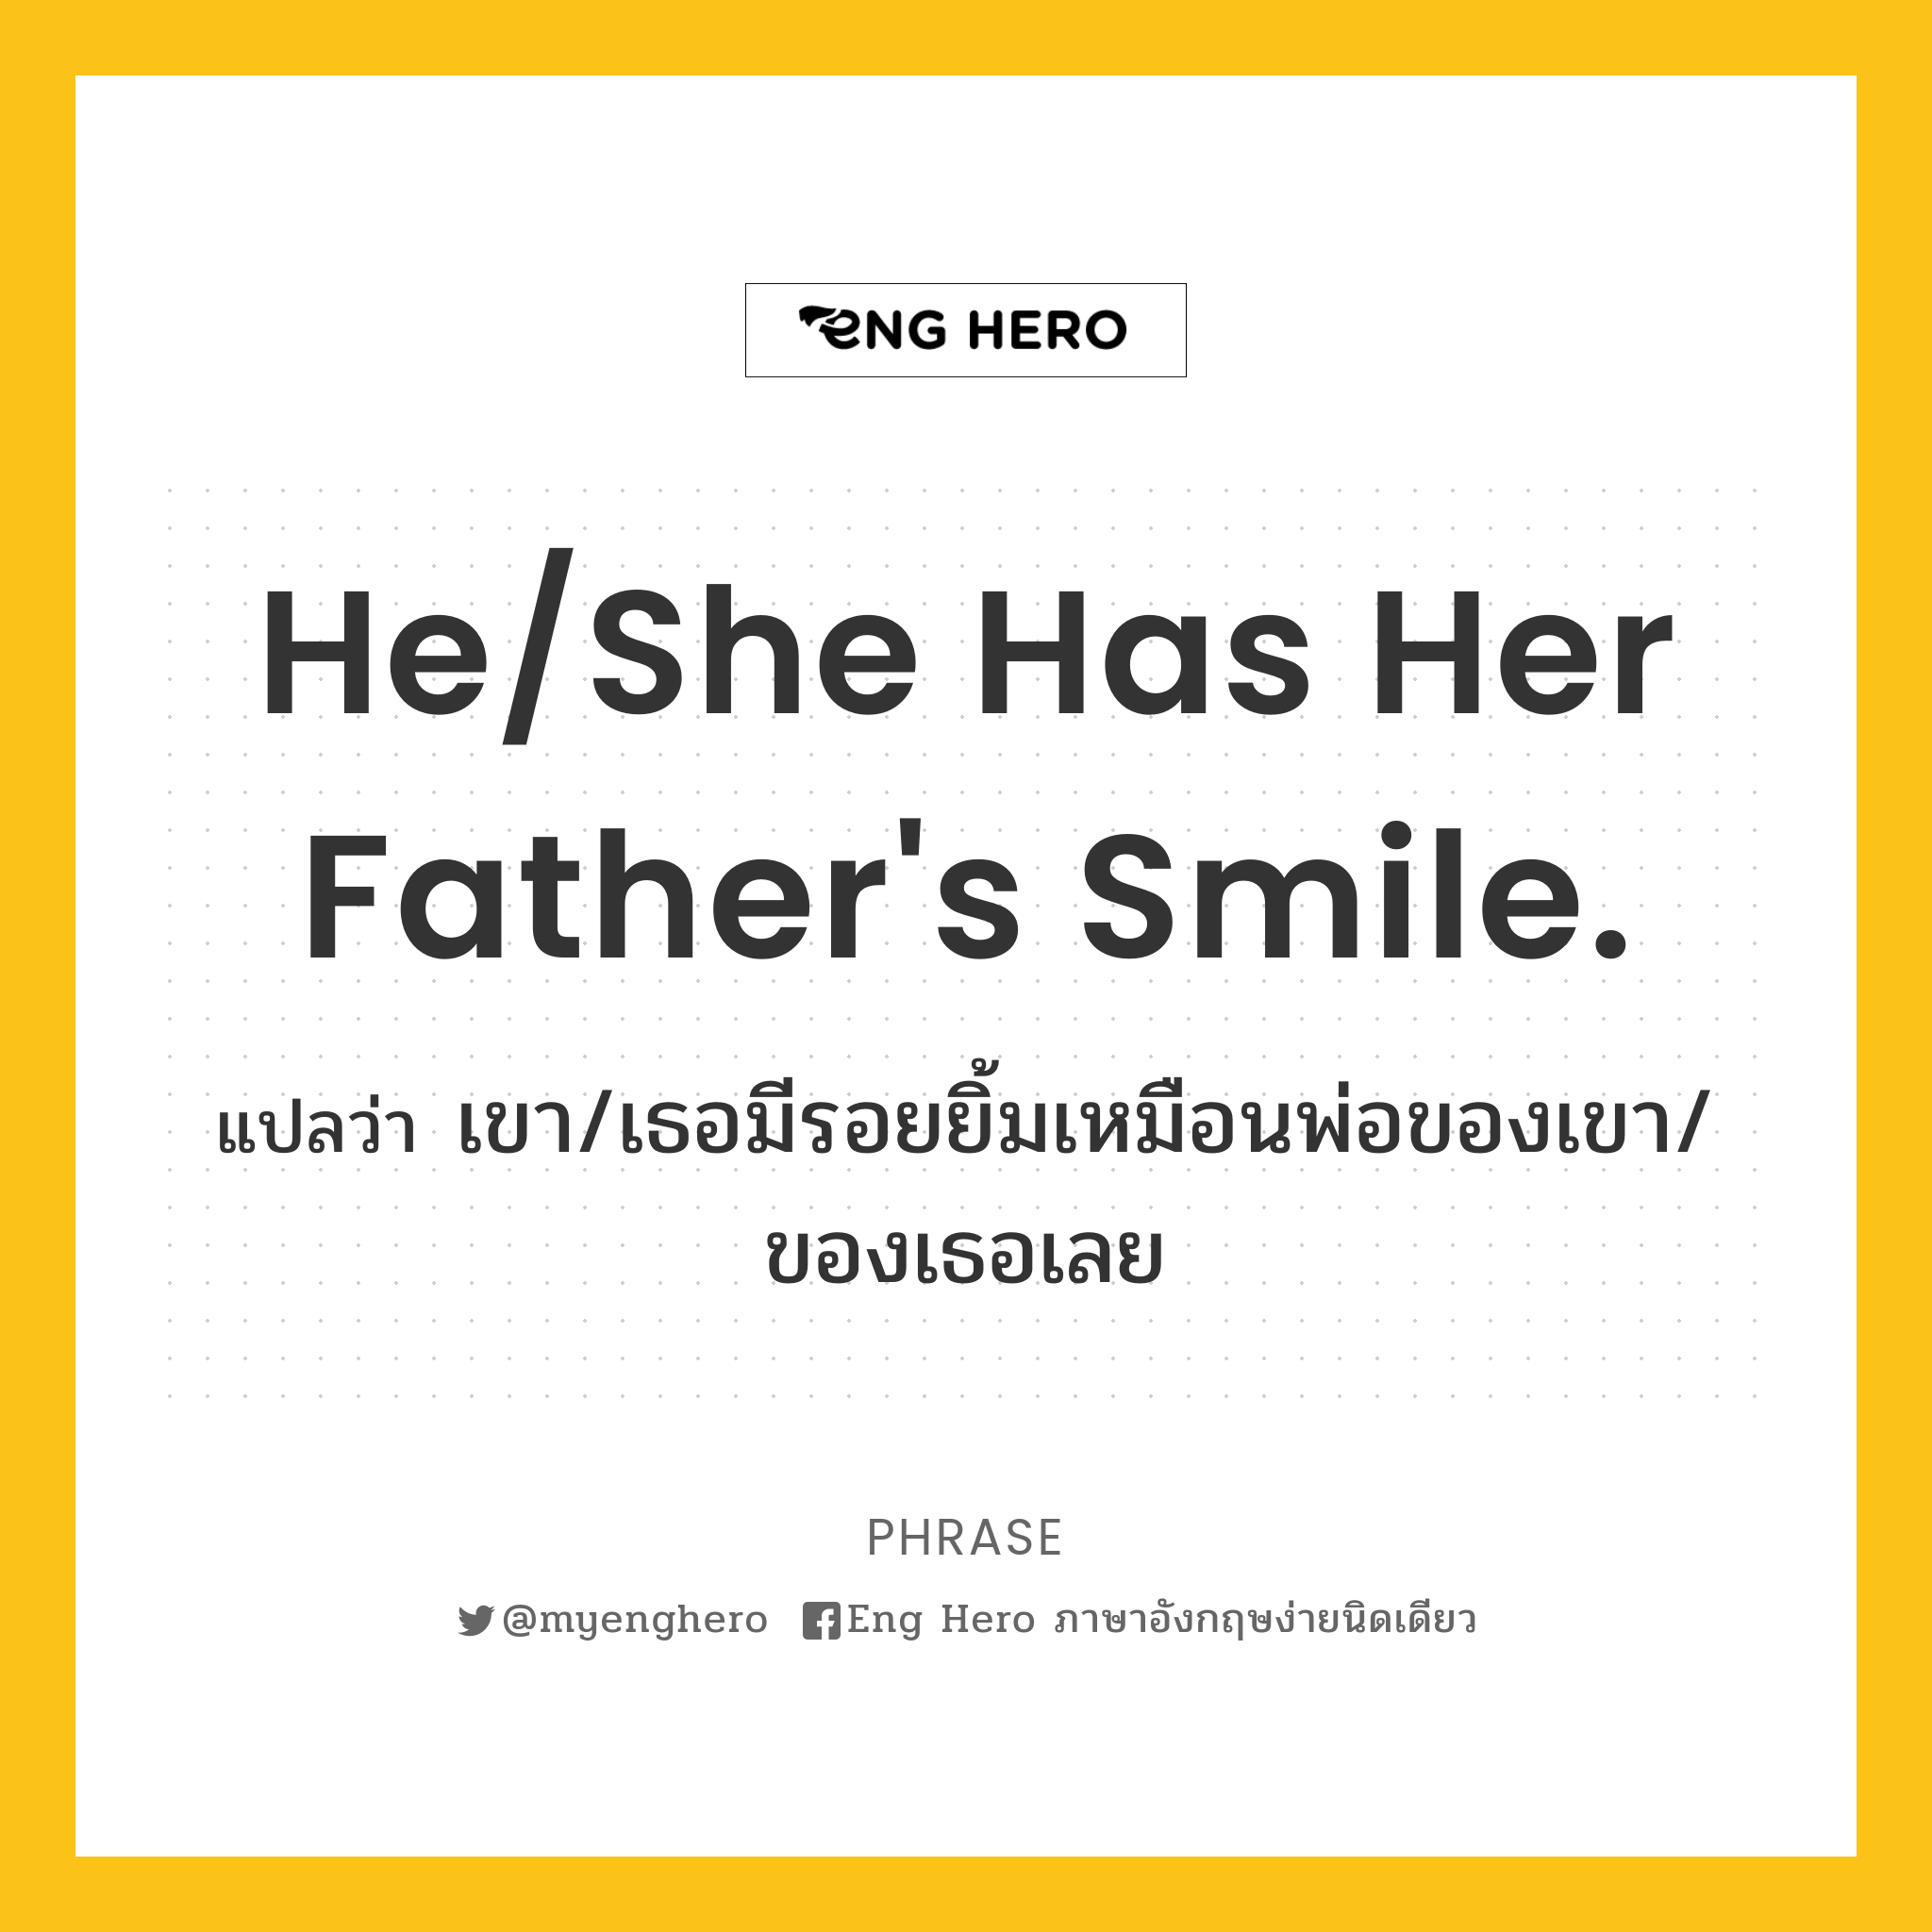 He/She has her father's smile.